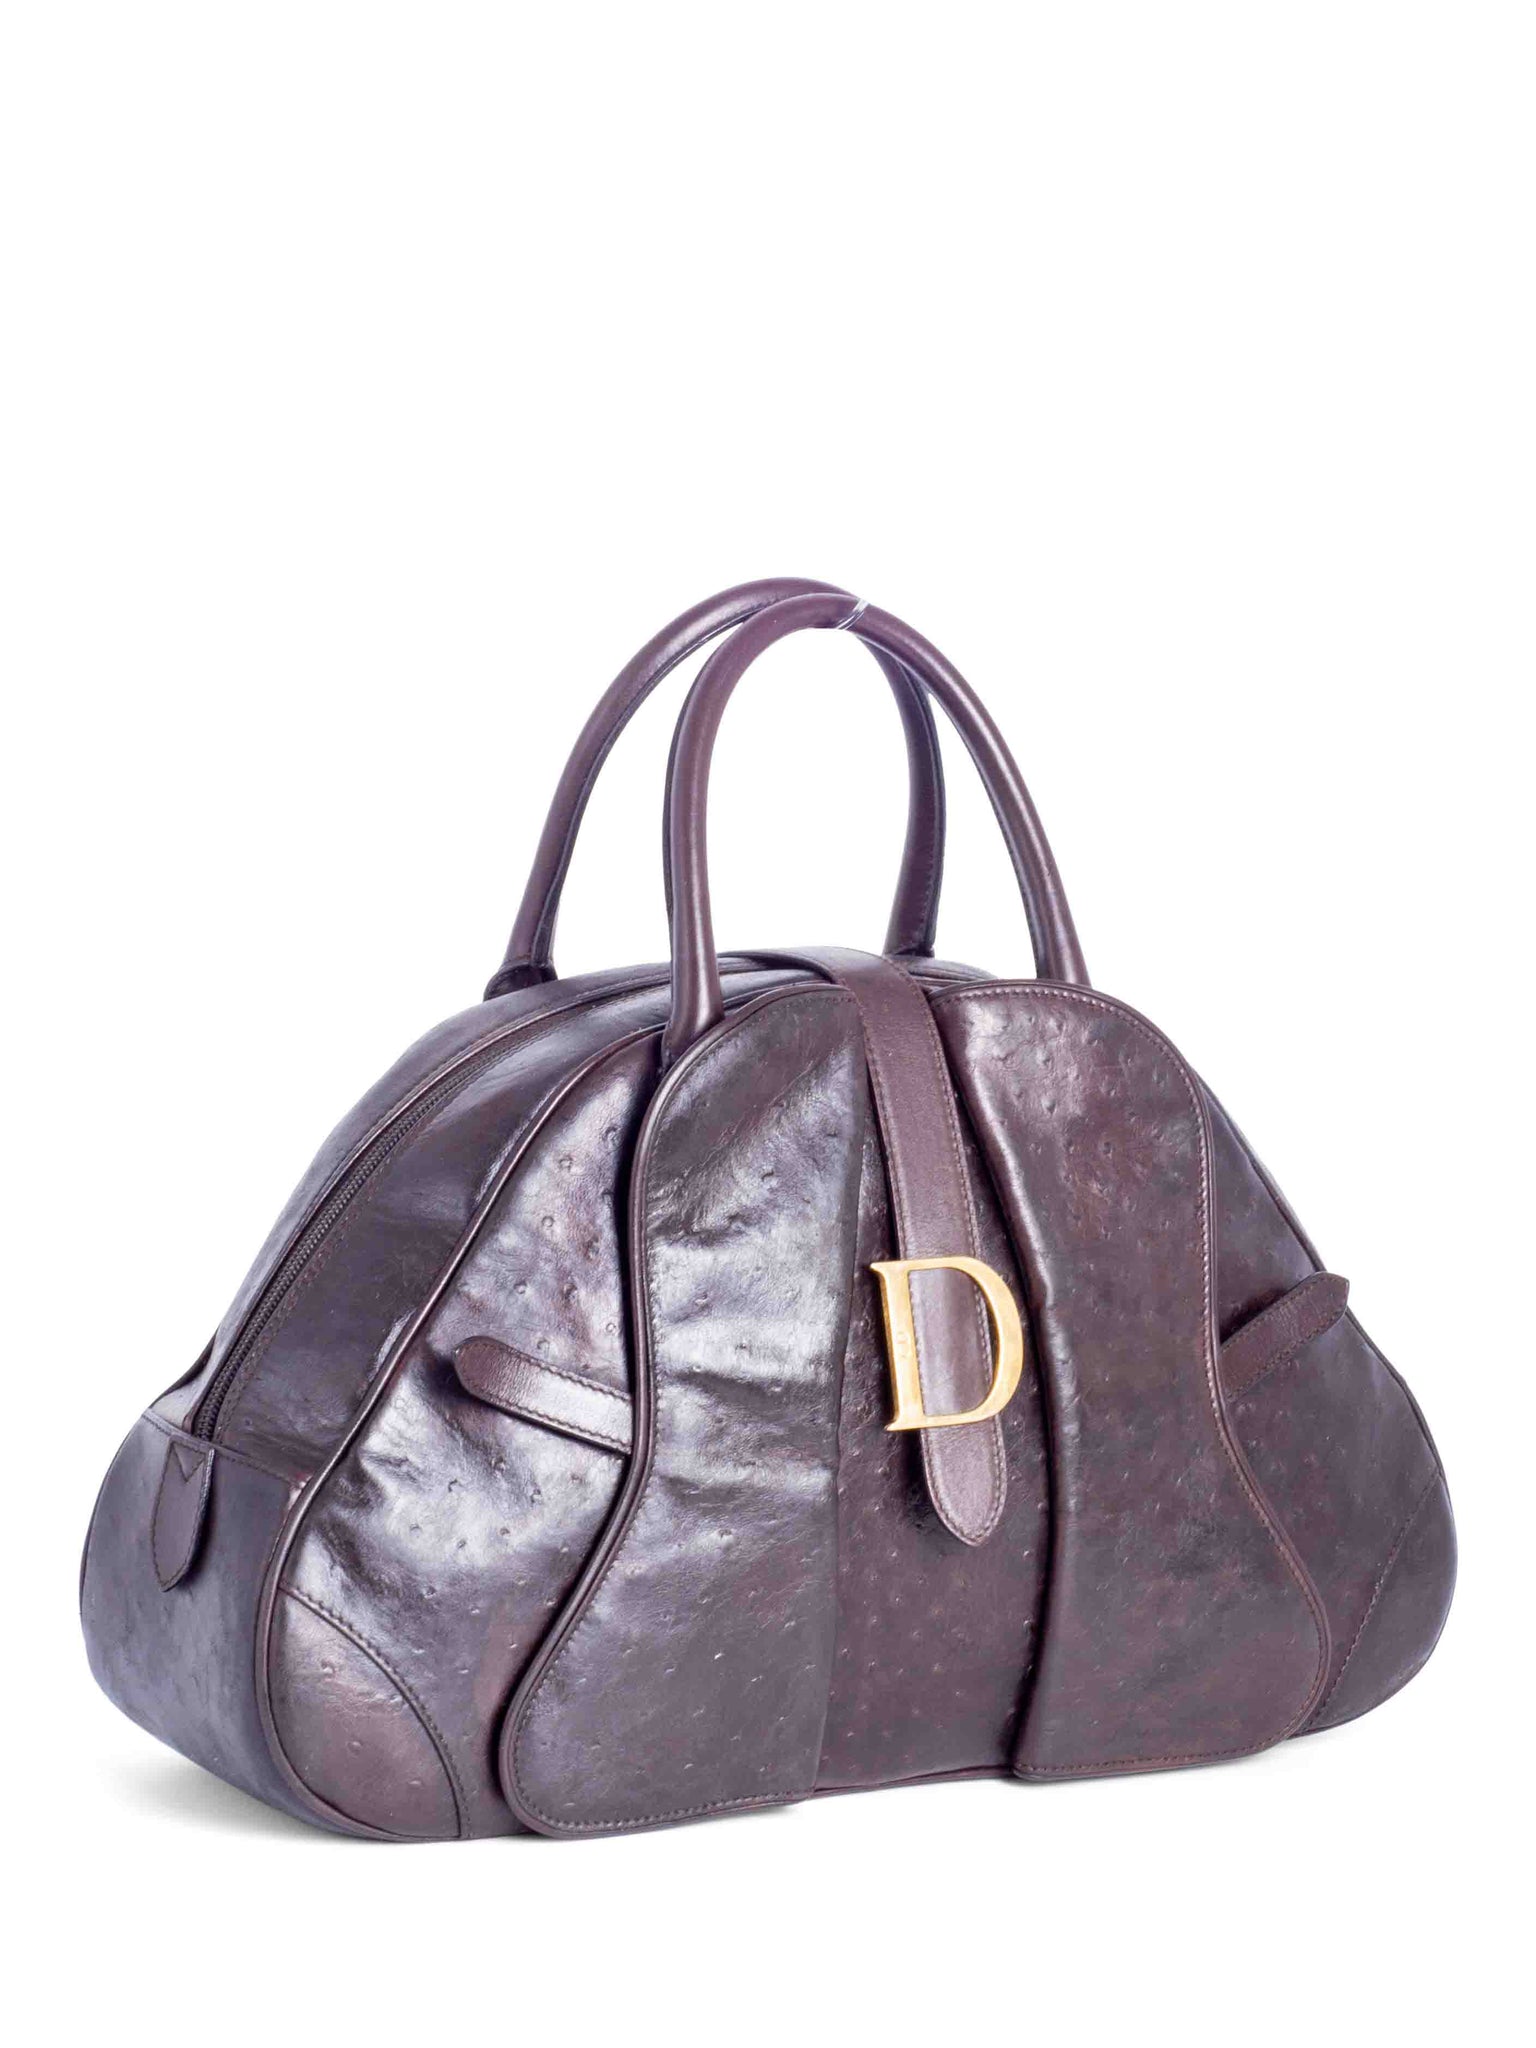 Christian Dior Ostrich Double Saddle Top Handle Bag Brown